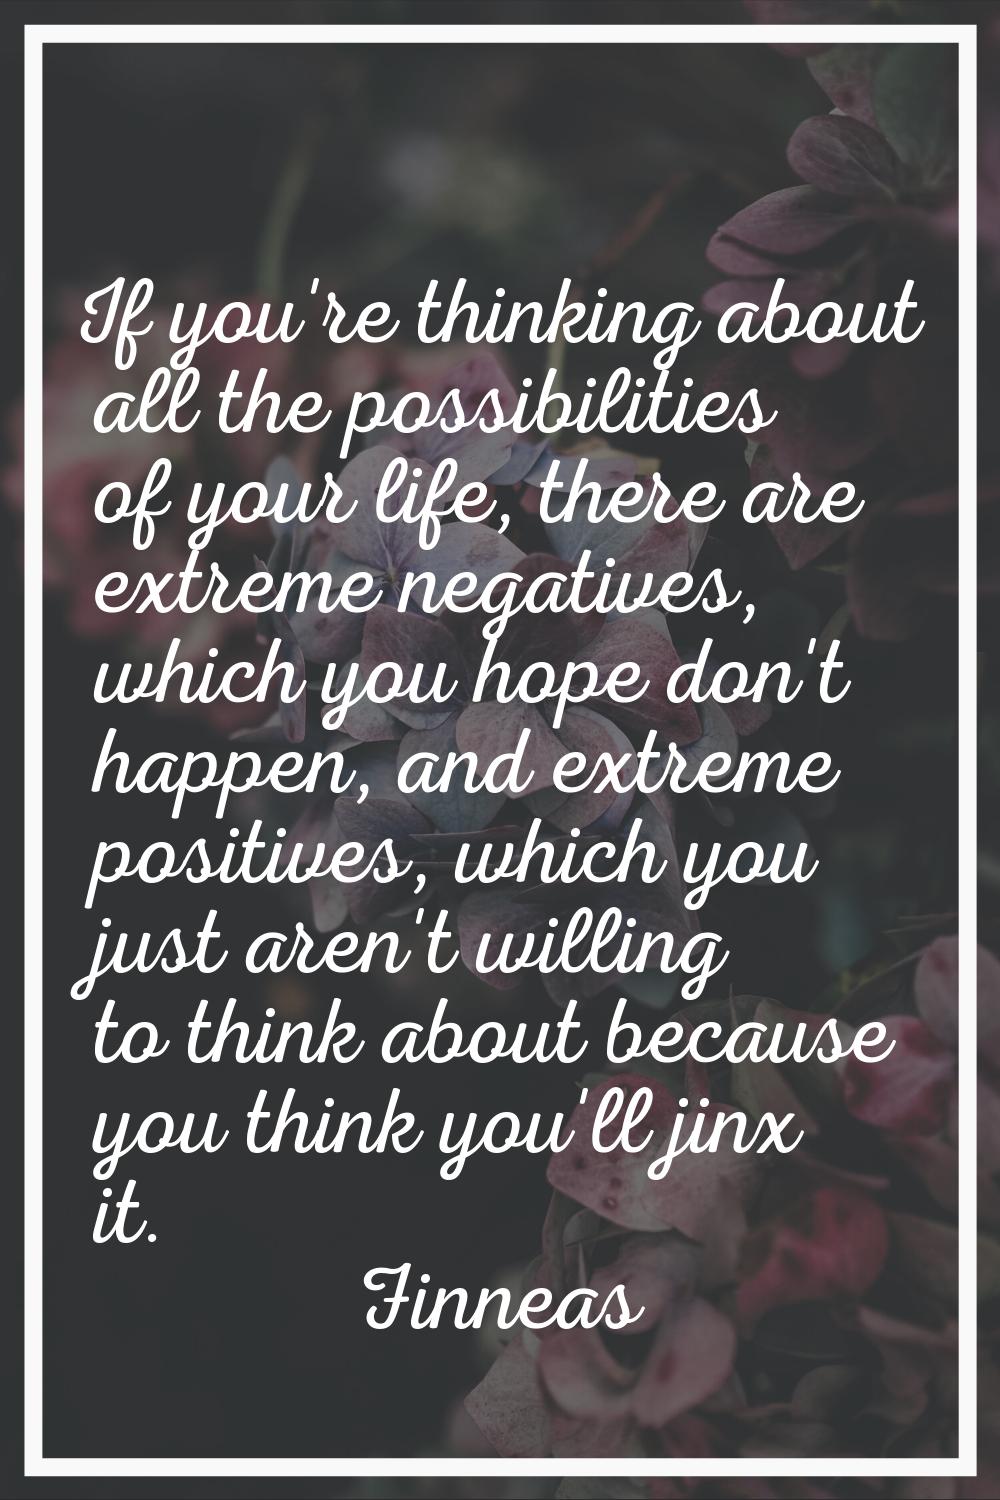 If you're thinking about all the possibilities of your life, there are extreme negatives, which you